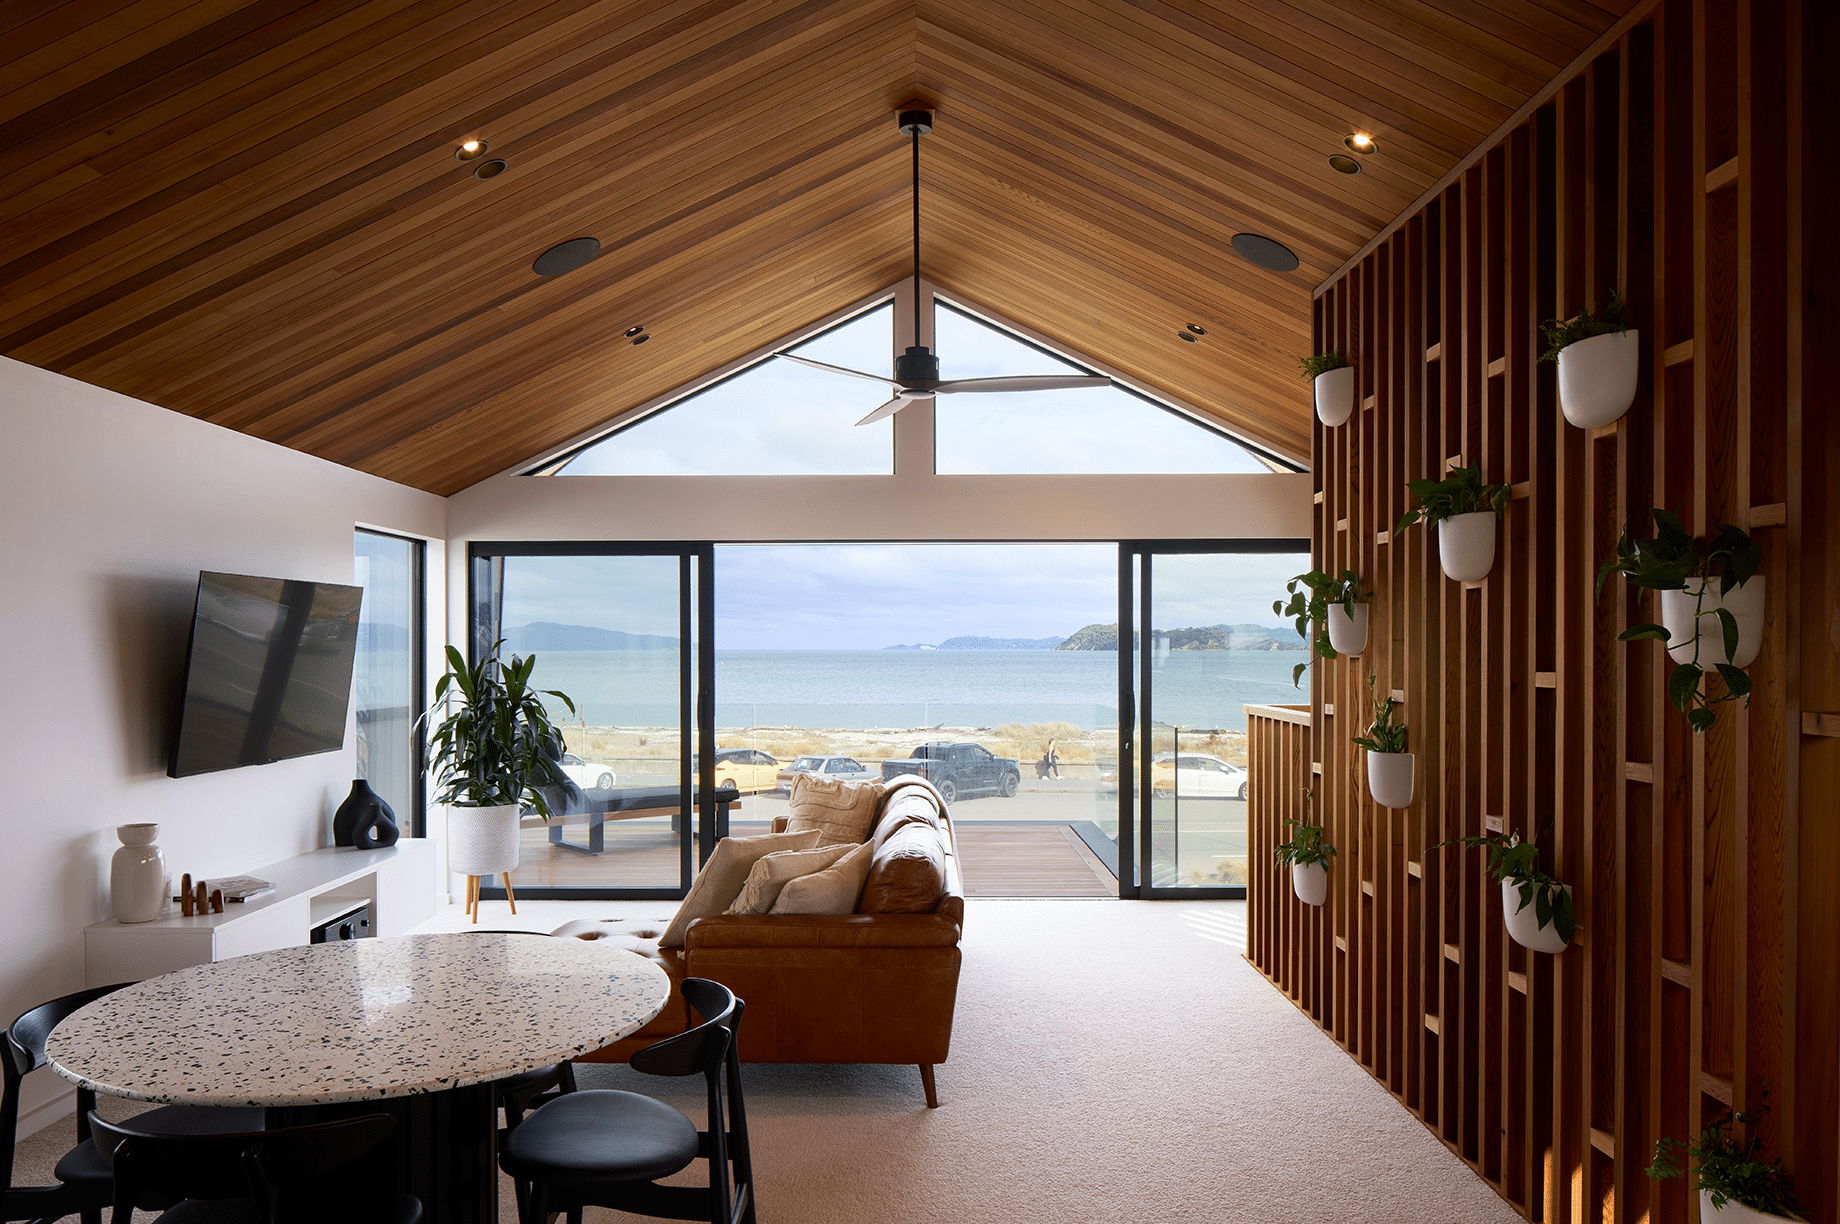 Petone Perfection showhome lounge with an ocean view